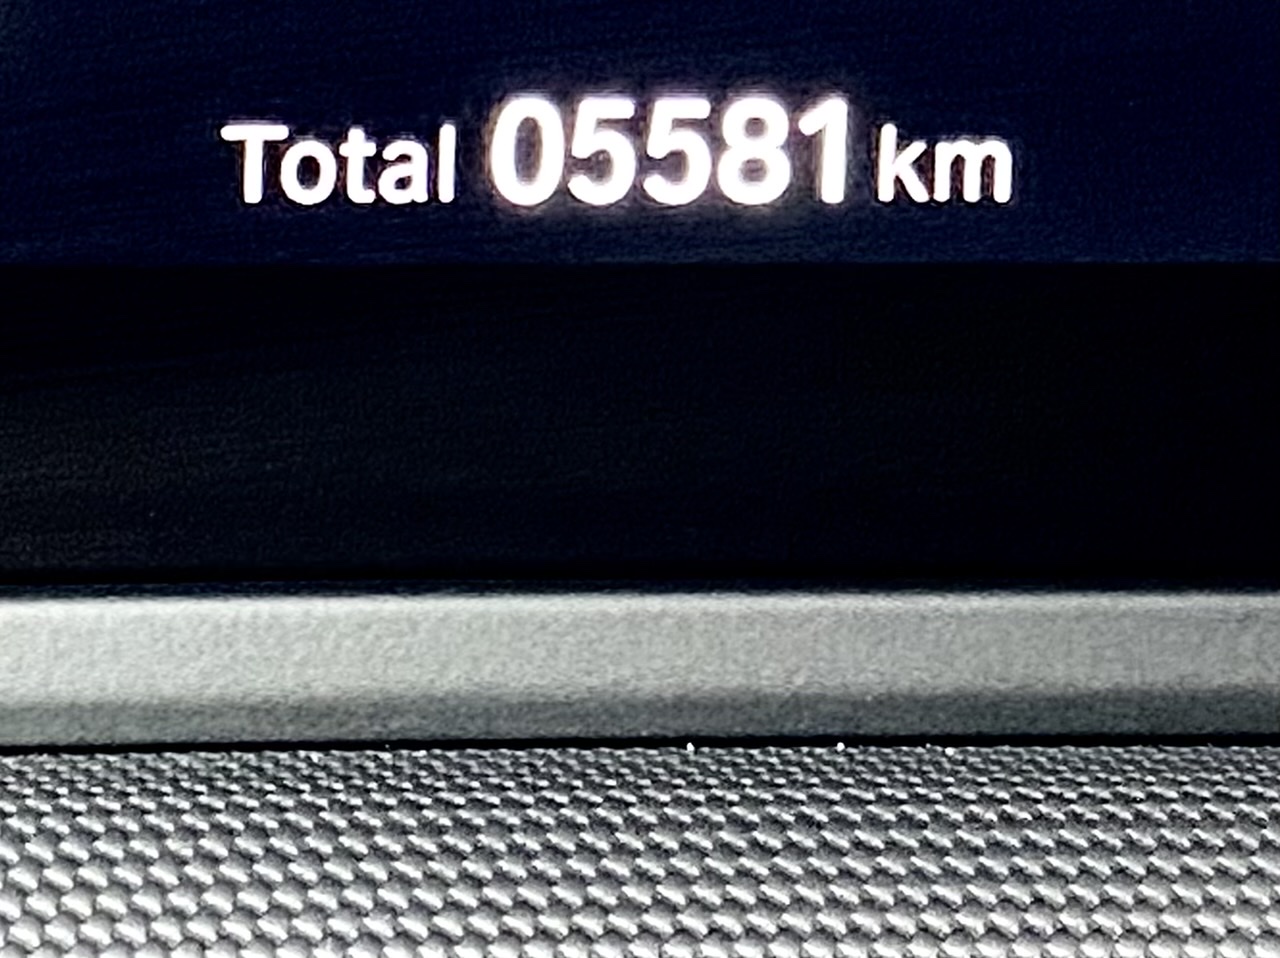 2021 BMW 220d Gran Coupé M Sport with 5.581 kilometres on the odometer